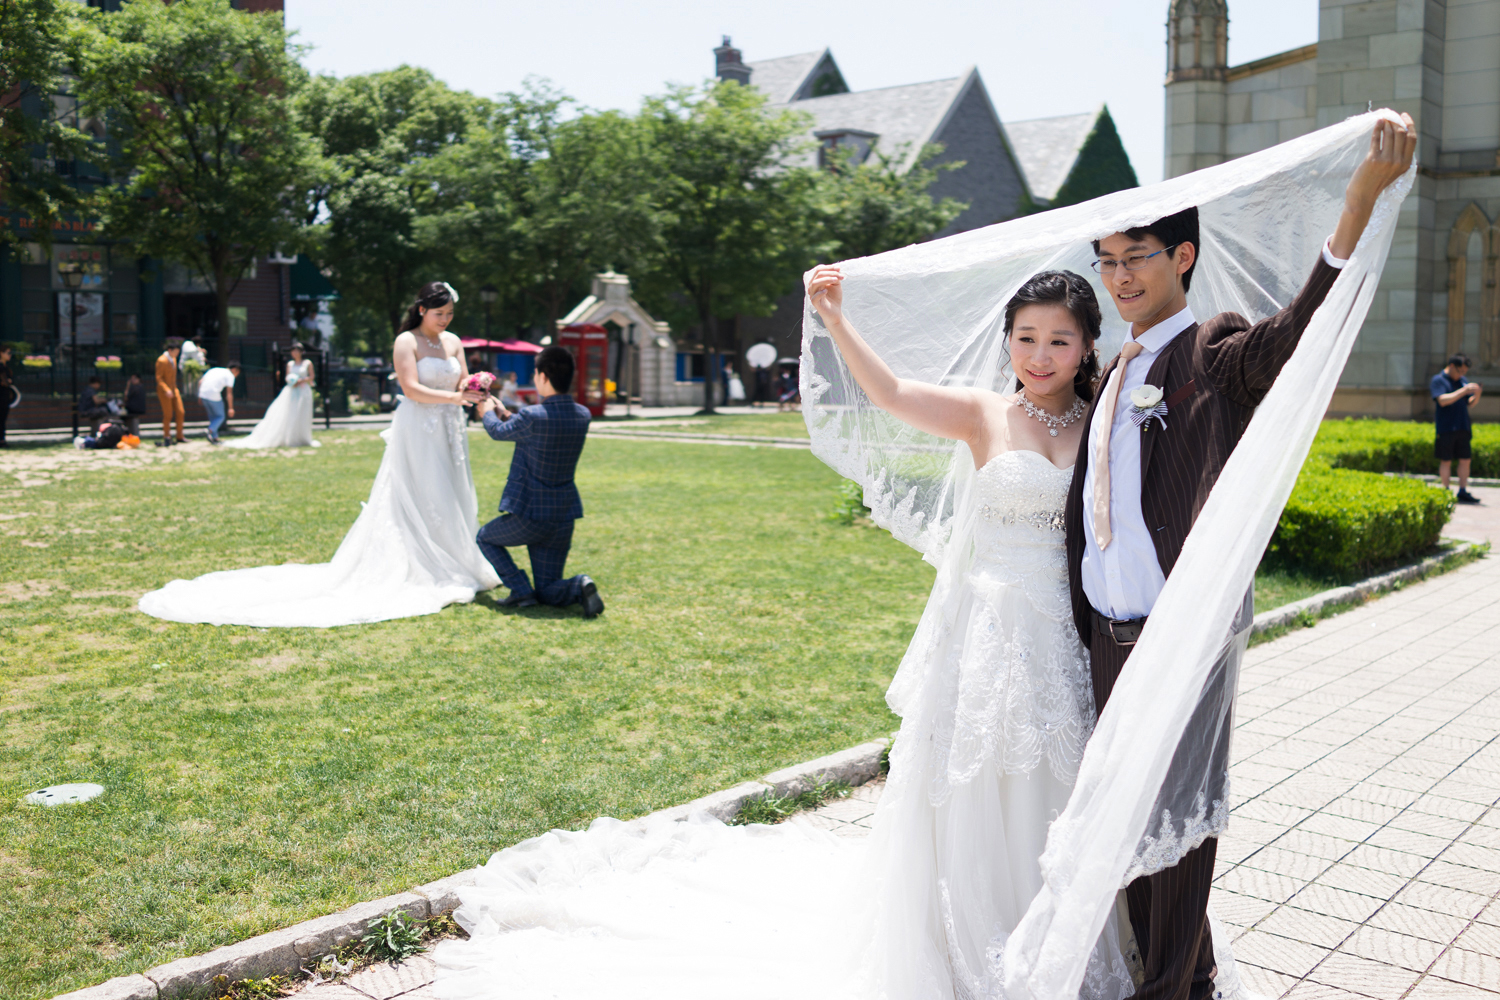 A young couple poses in front of the church, a popular backdrop for wedding photos.